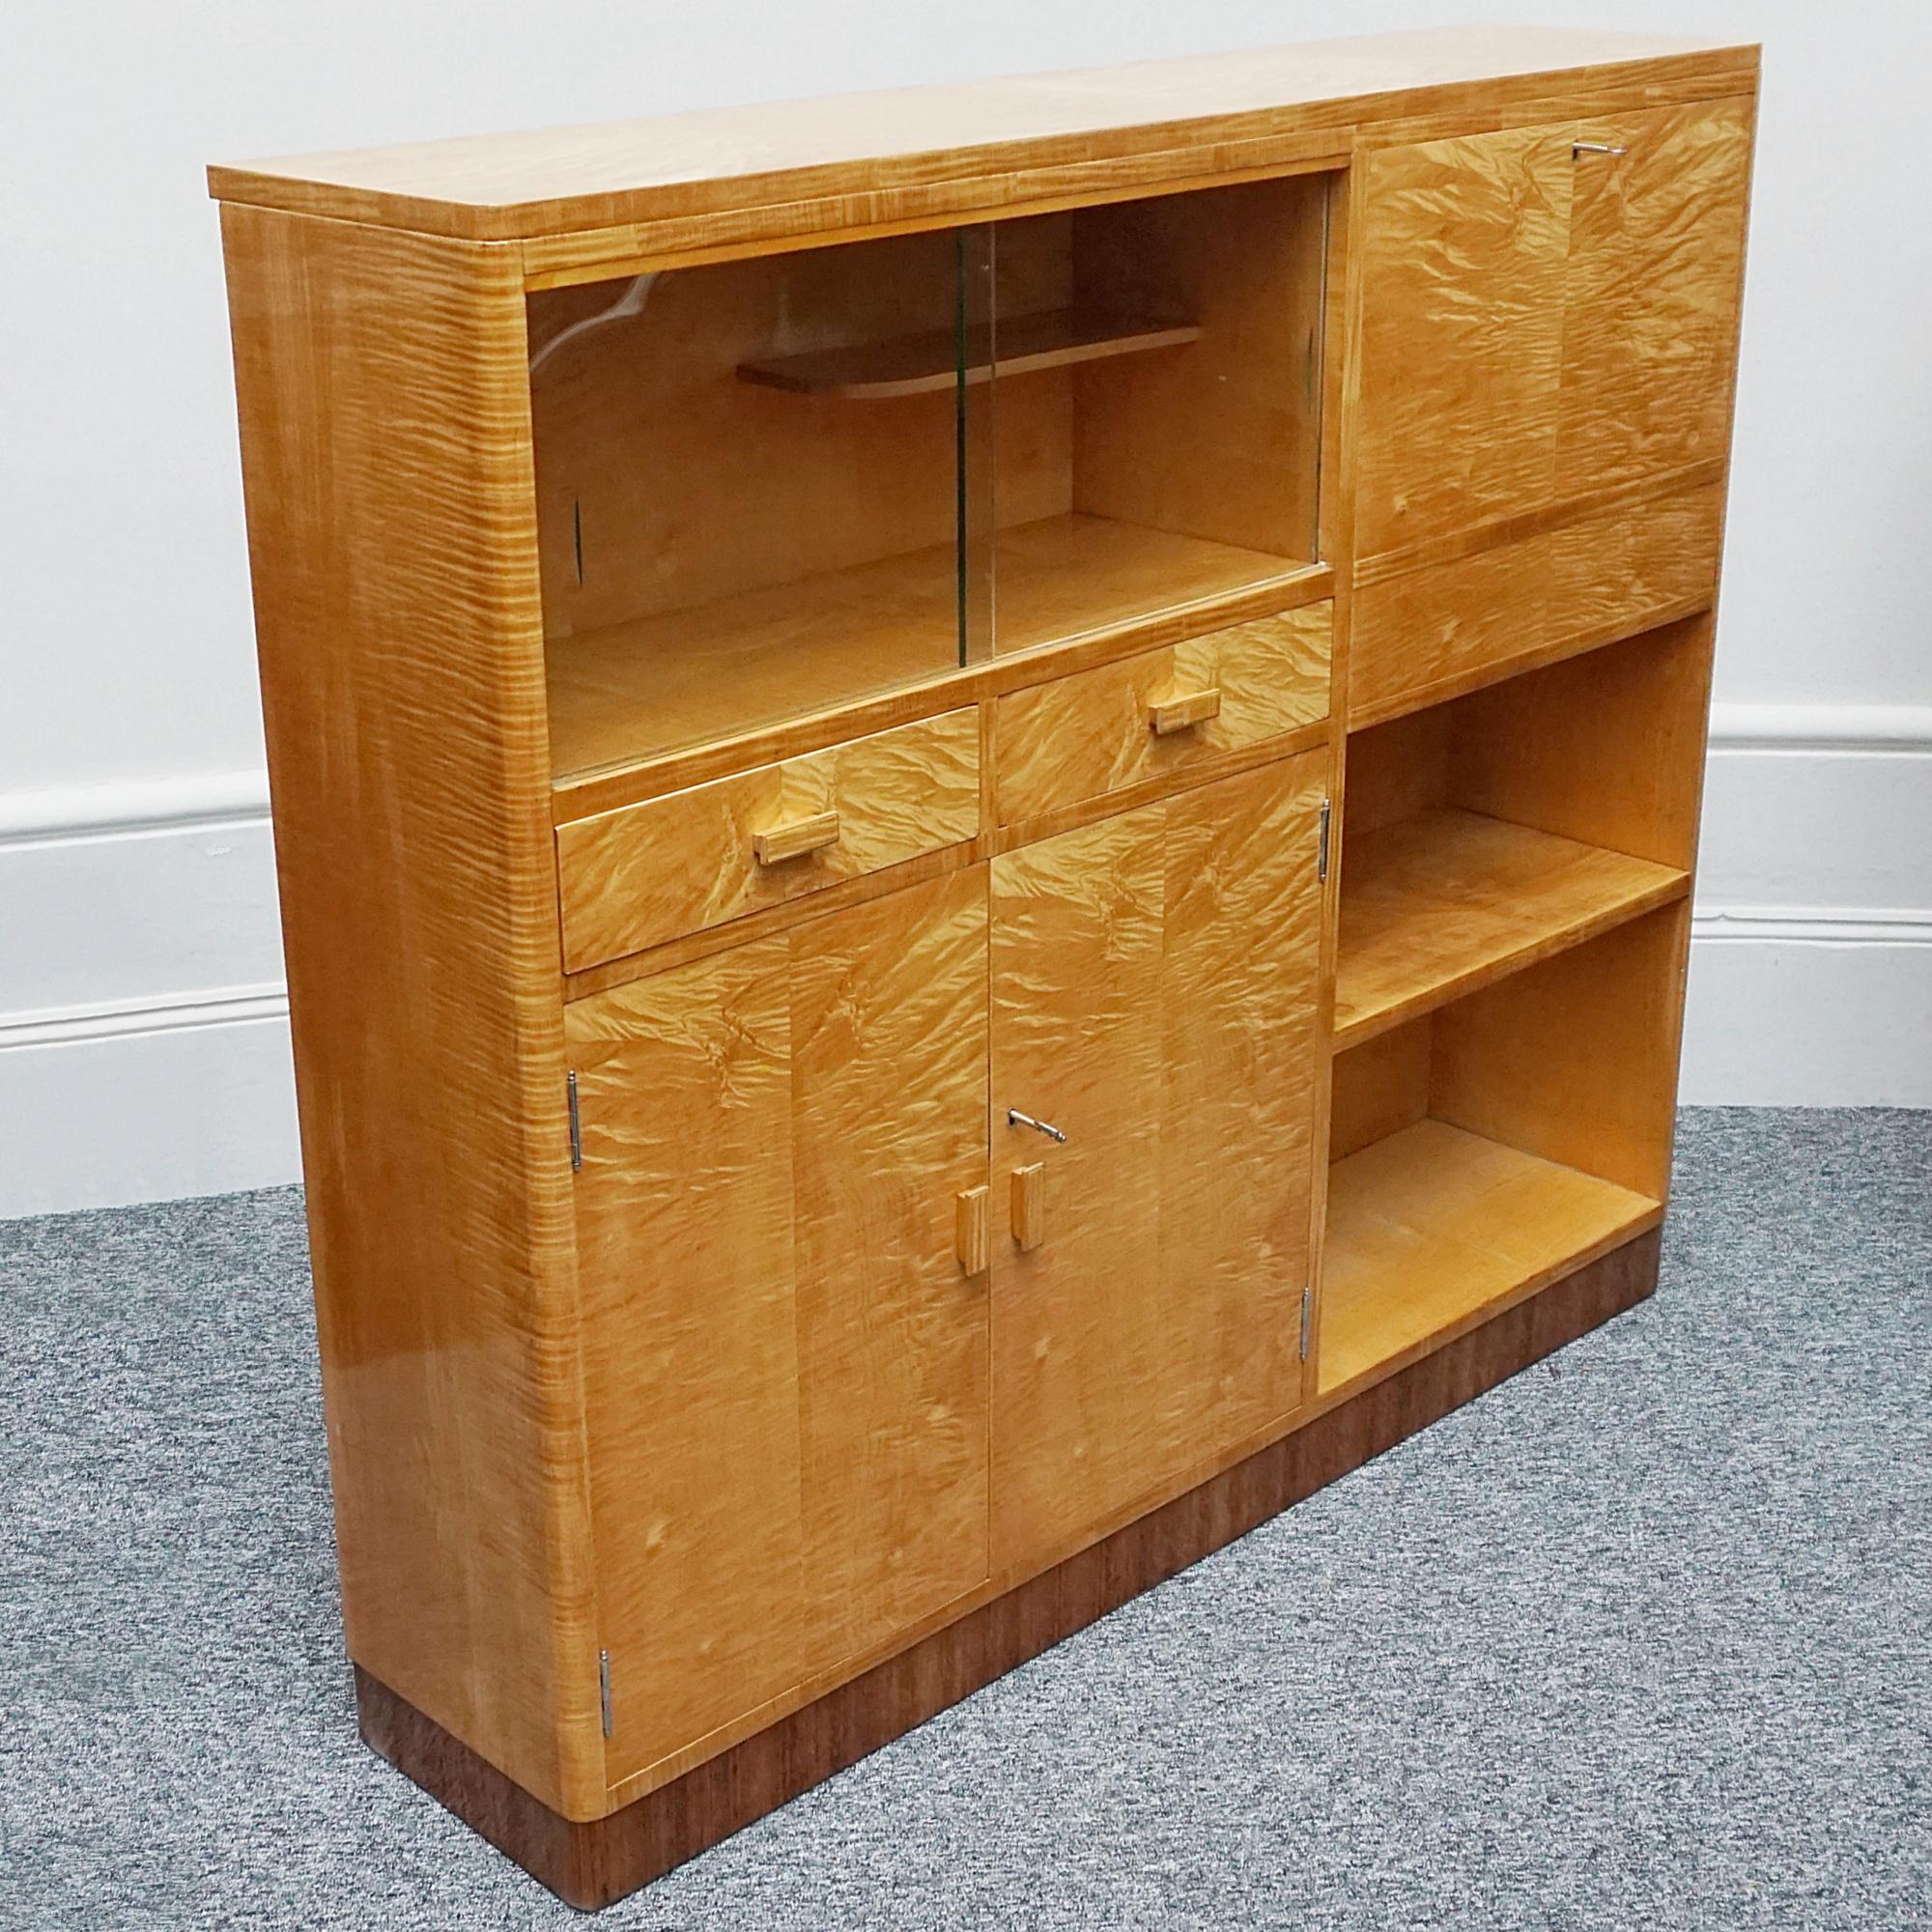 An Art Deco Satin Birch Honey Coloured Drinks Cabinet by Heal's of London  9